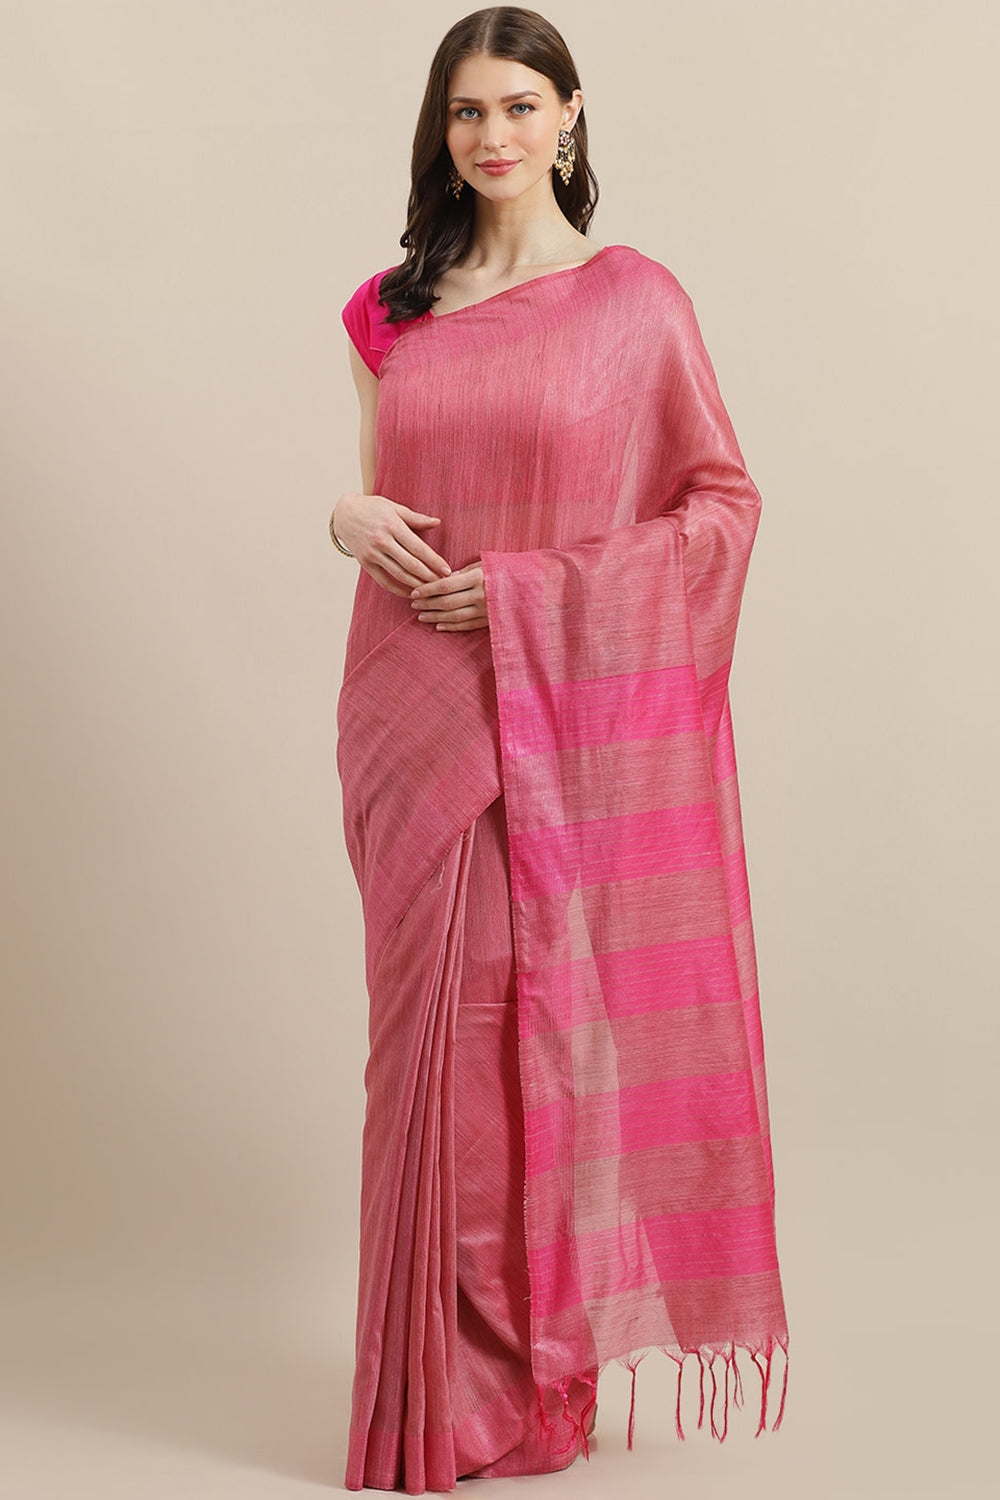 Buy Pink Woven Silk One Minute Saree Online